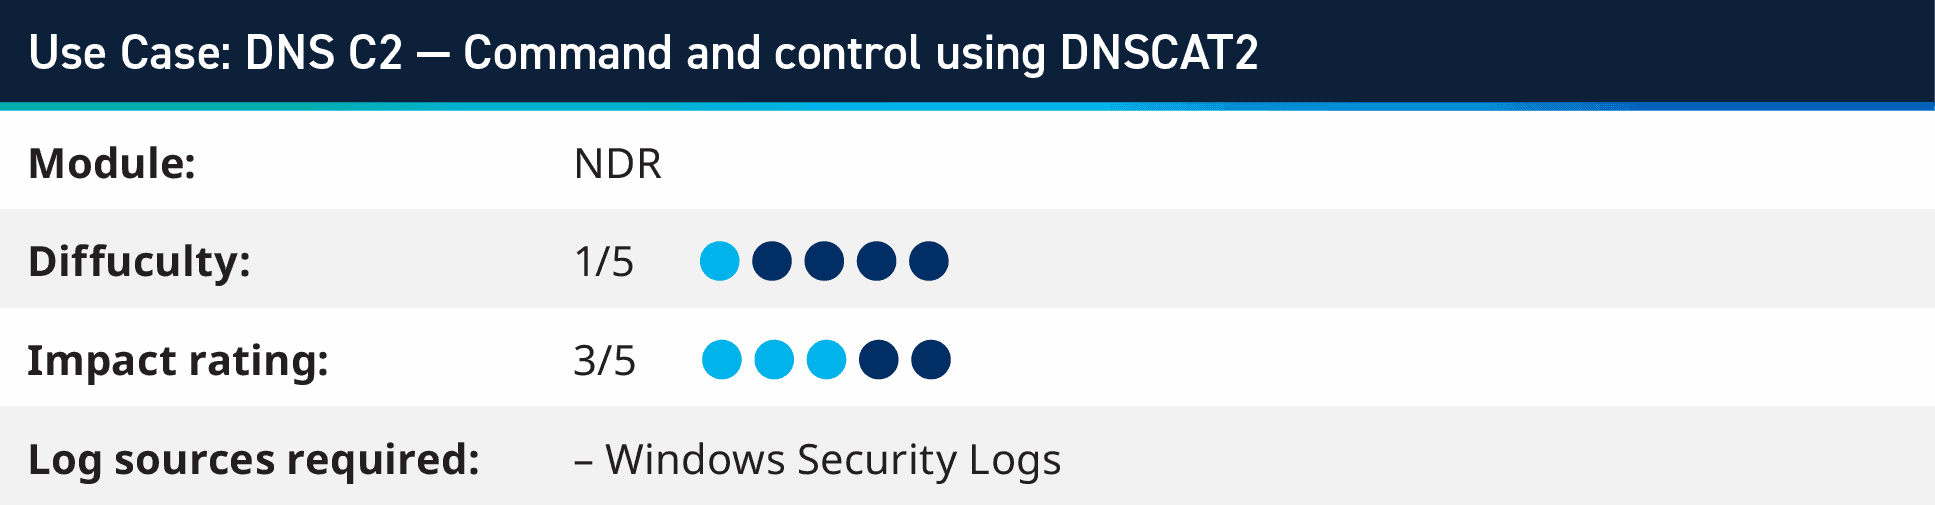 Security use case: DNS C2 – Command and control using DNSCAT2 